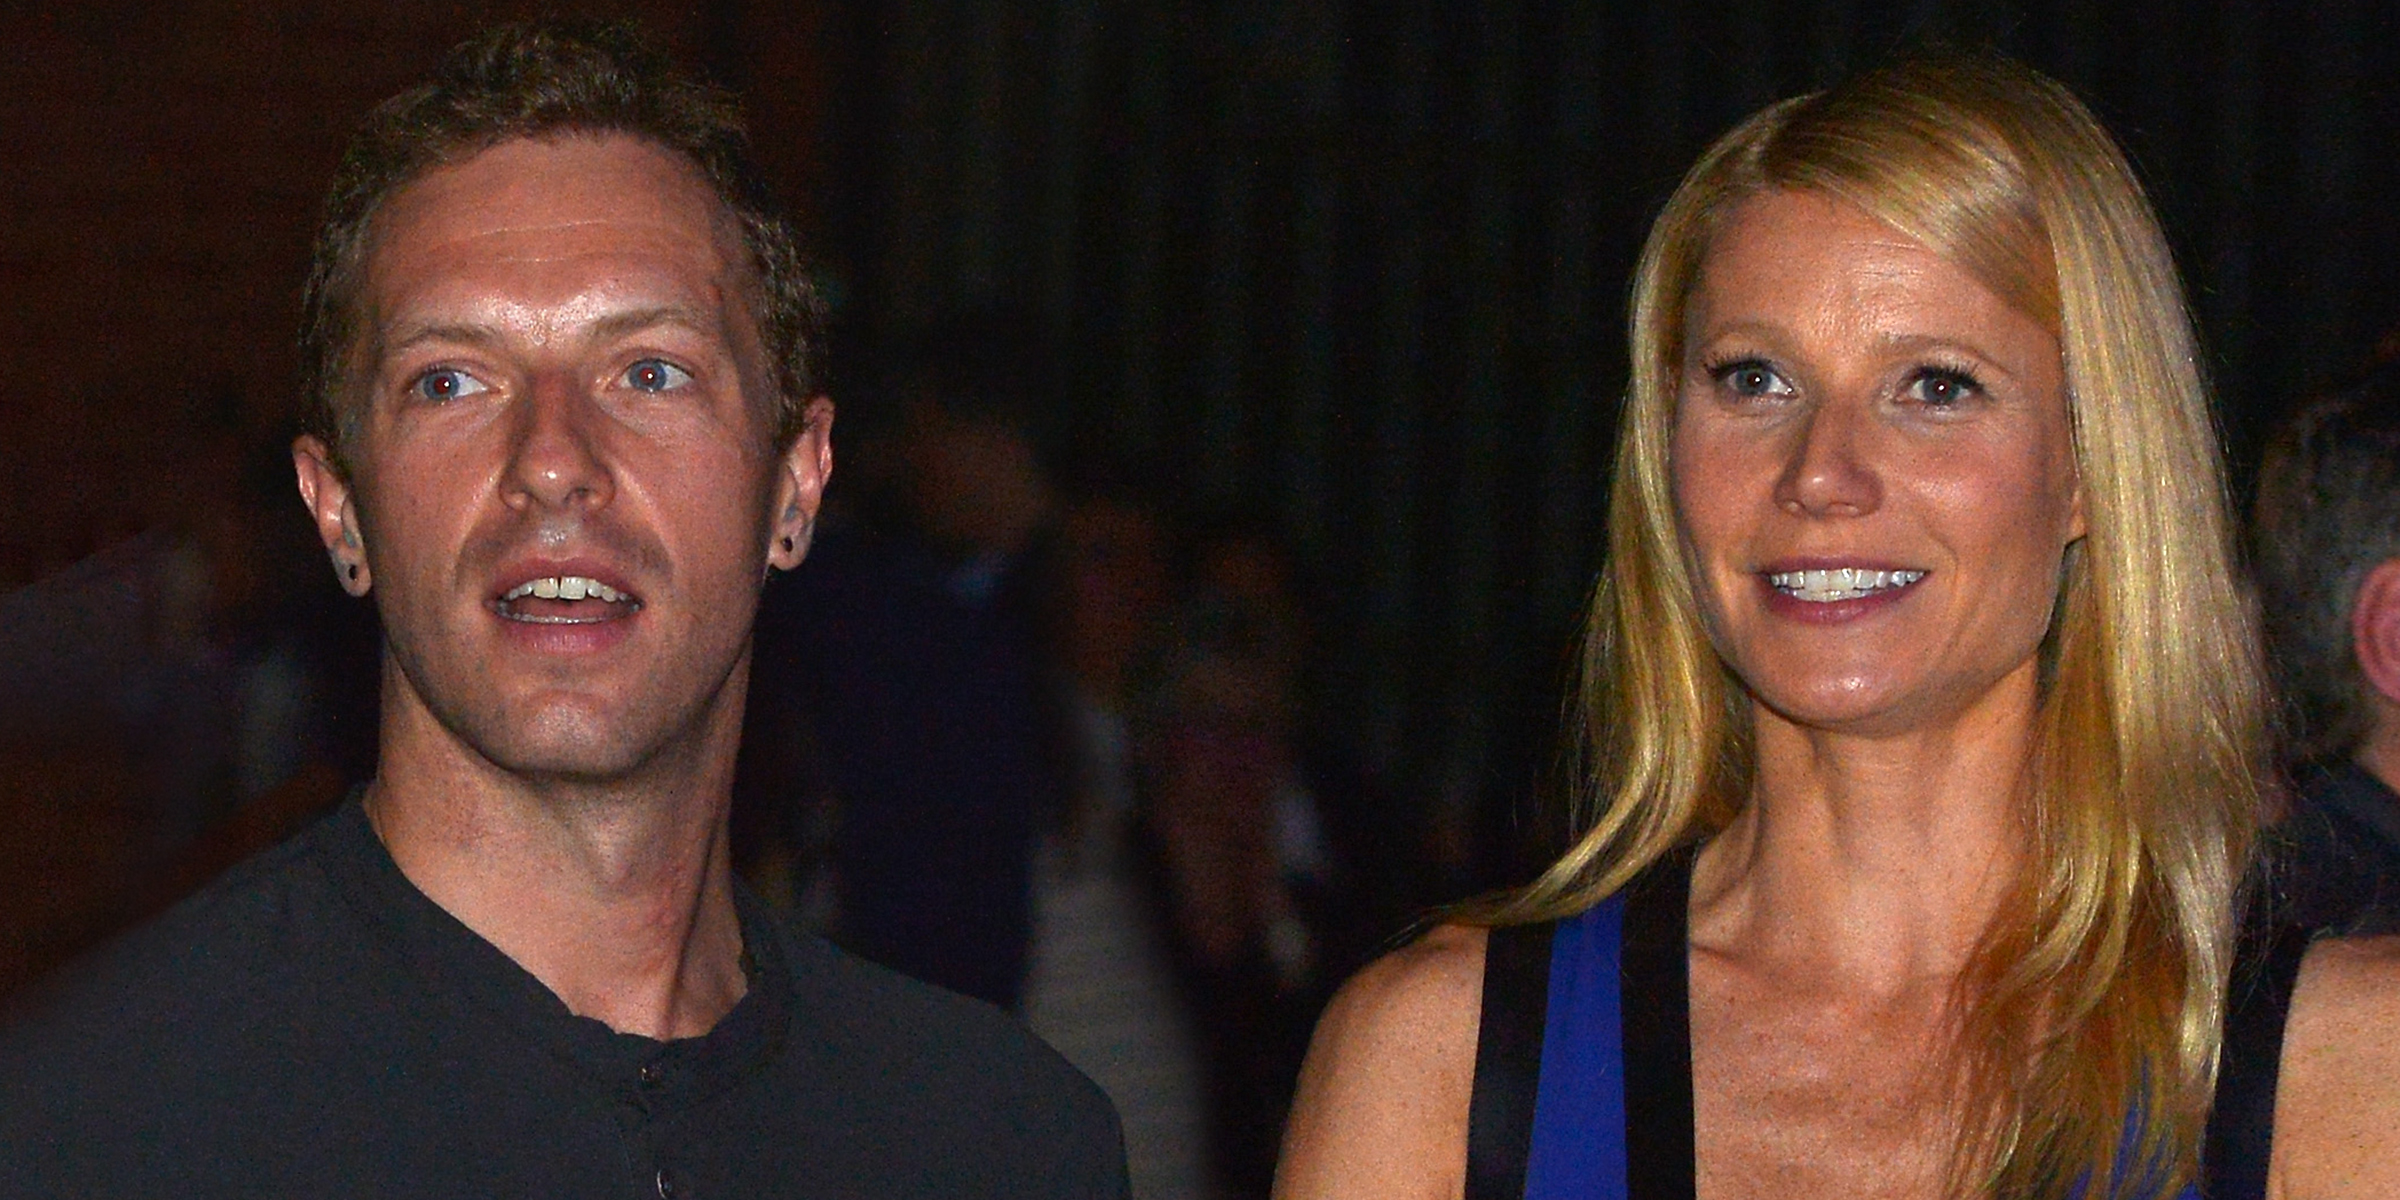 Chris Martin and Gwyneth Paltrow. | Source: Getty Images